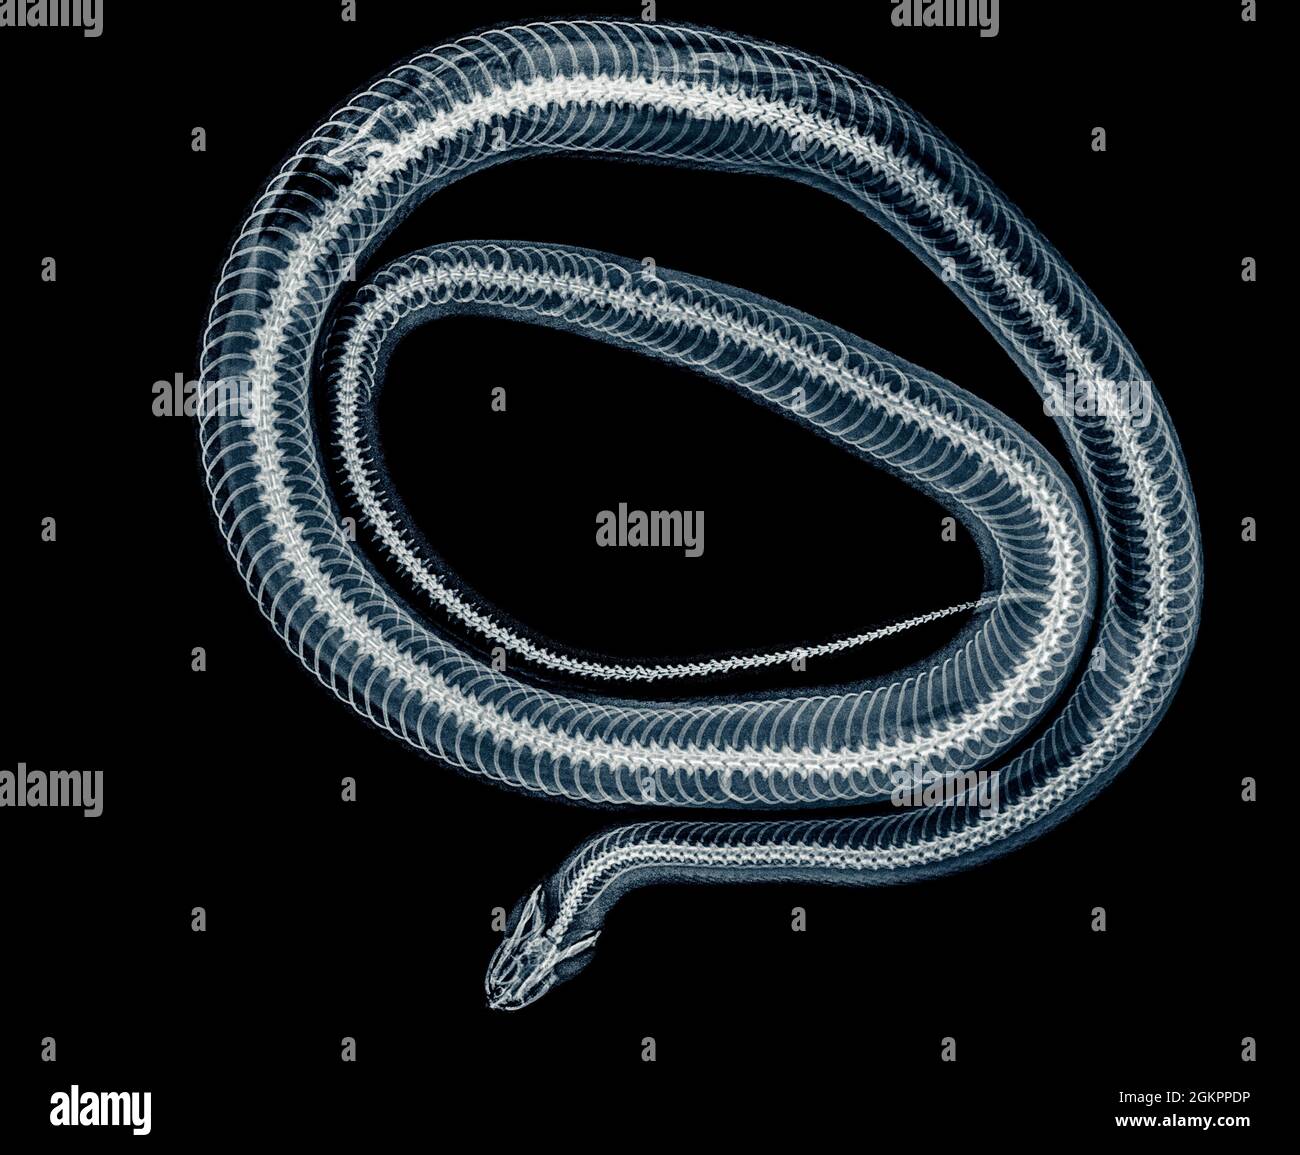 Coiled Snake under x-ray a whole mouse can be seen being digested on the left Stock Photo